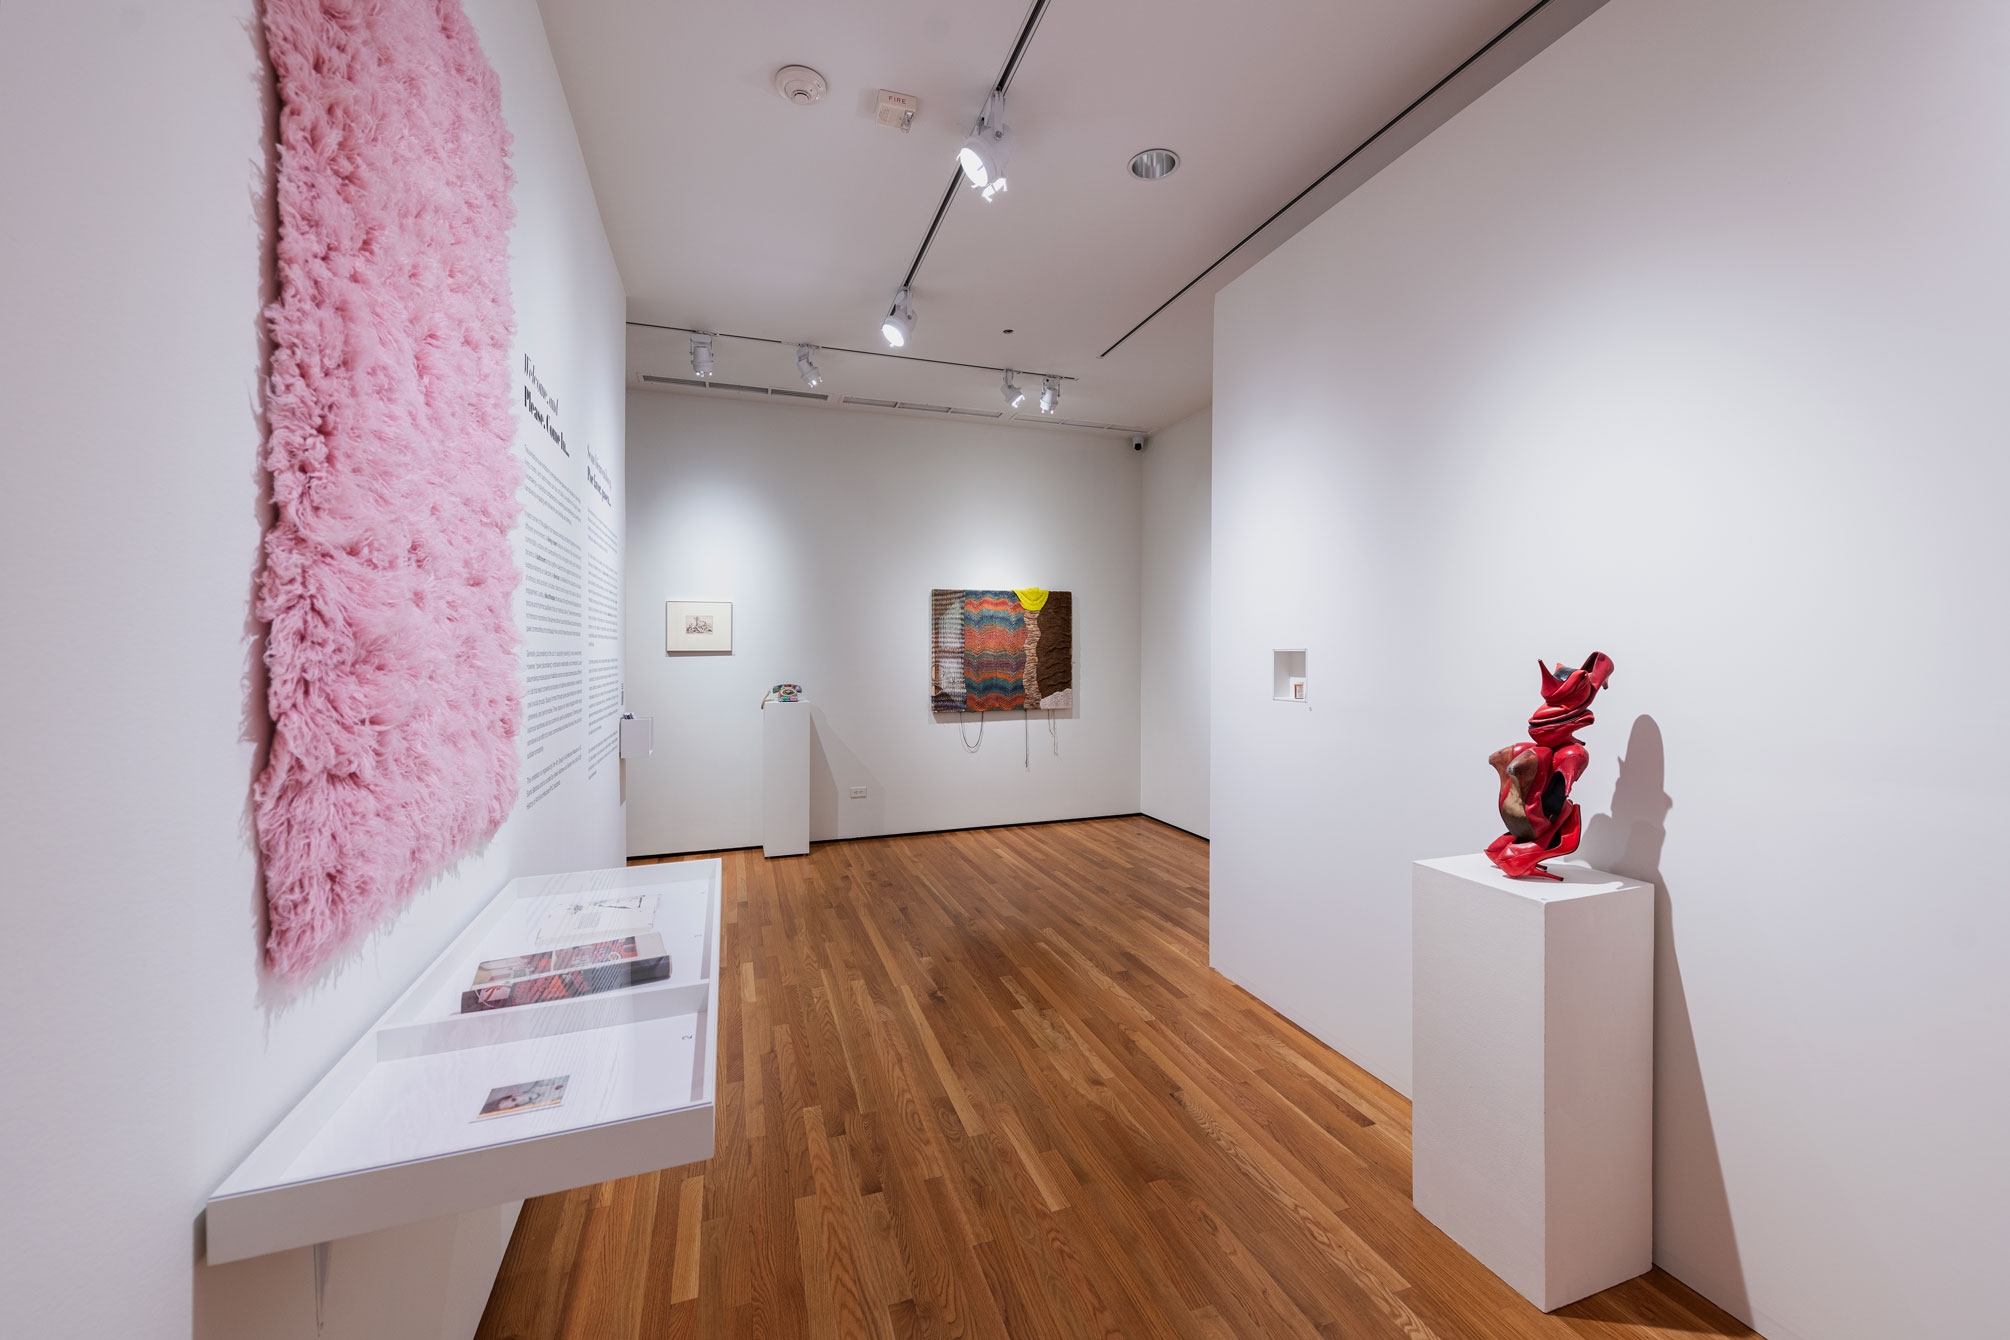 installation view at museum